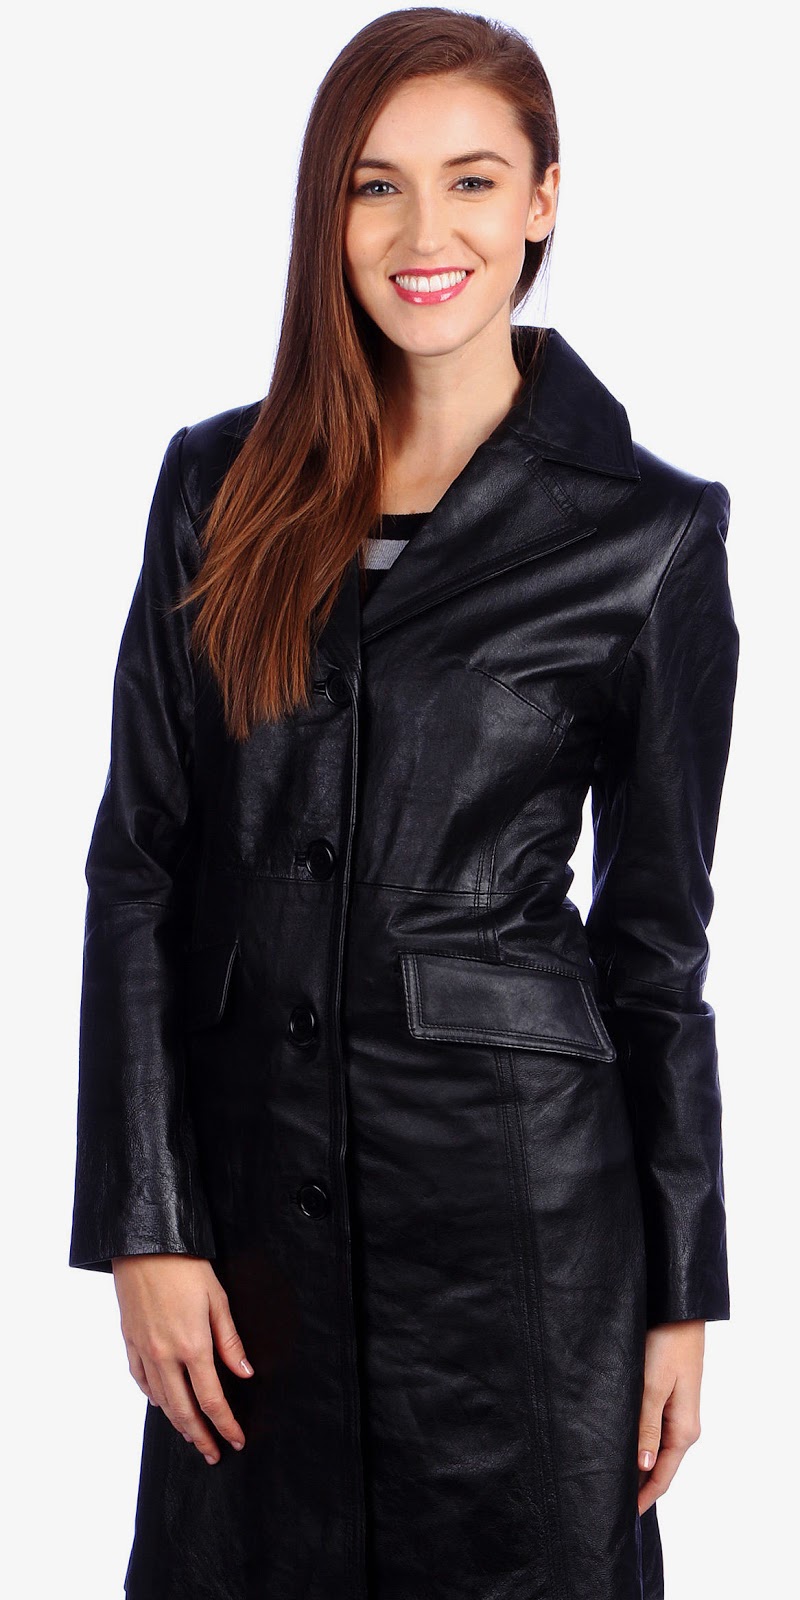 Leather Coat Daydreams: A girl you would like to meet